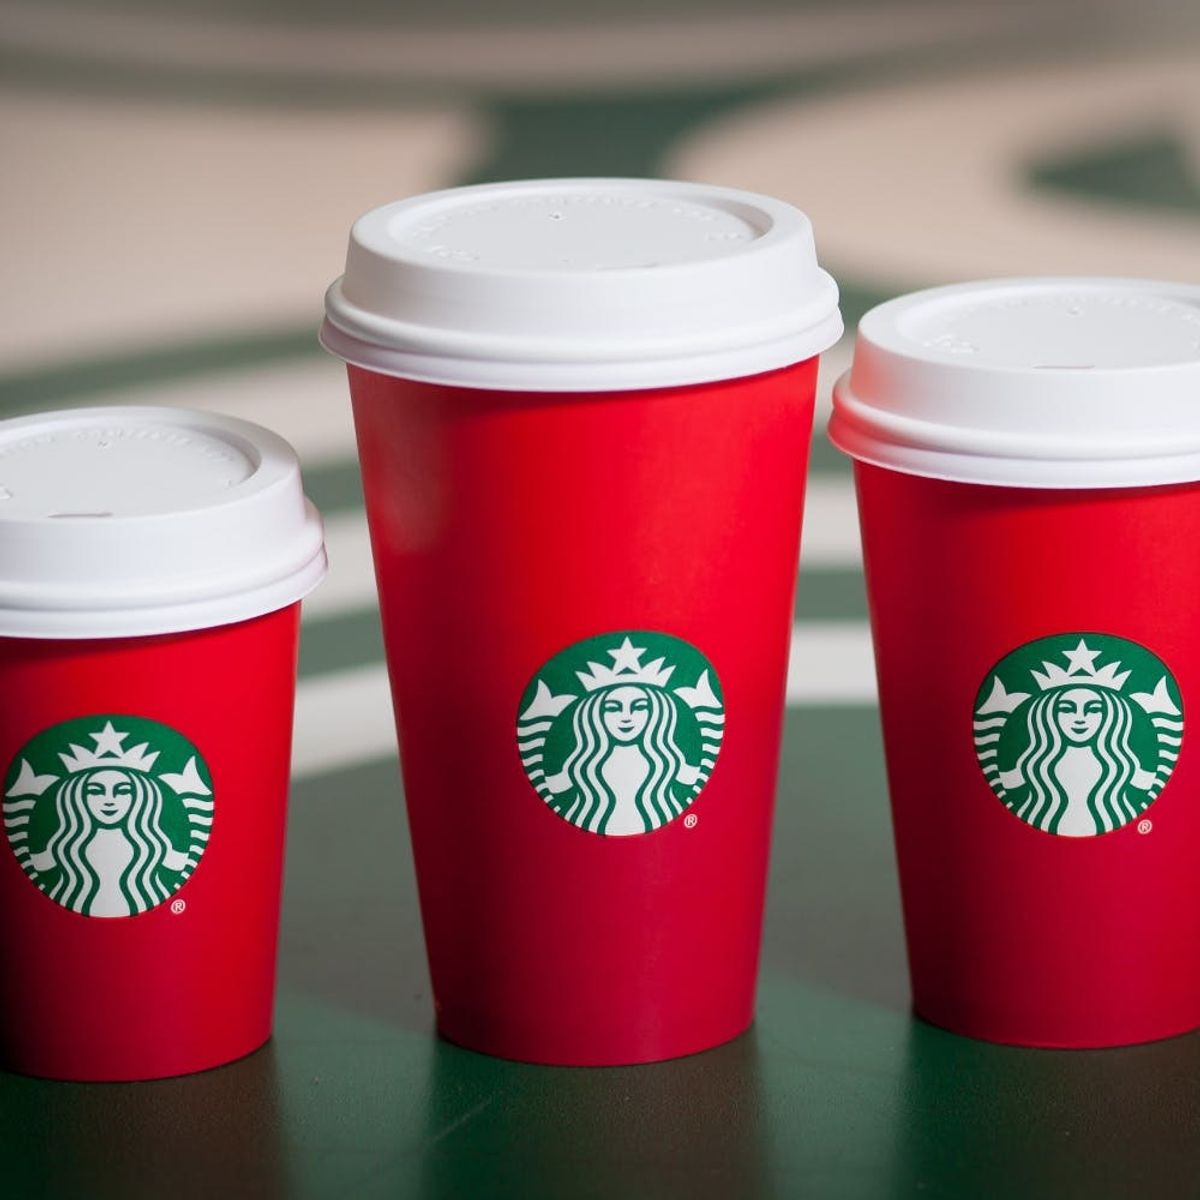 More Starbucks Red Holiday Cup Designs May Be Coming (and We Have a Sneak Peek!)